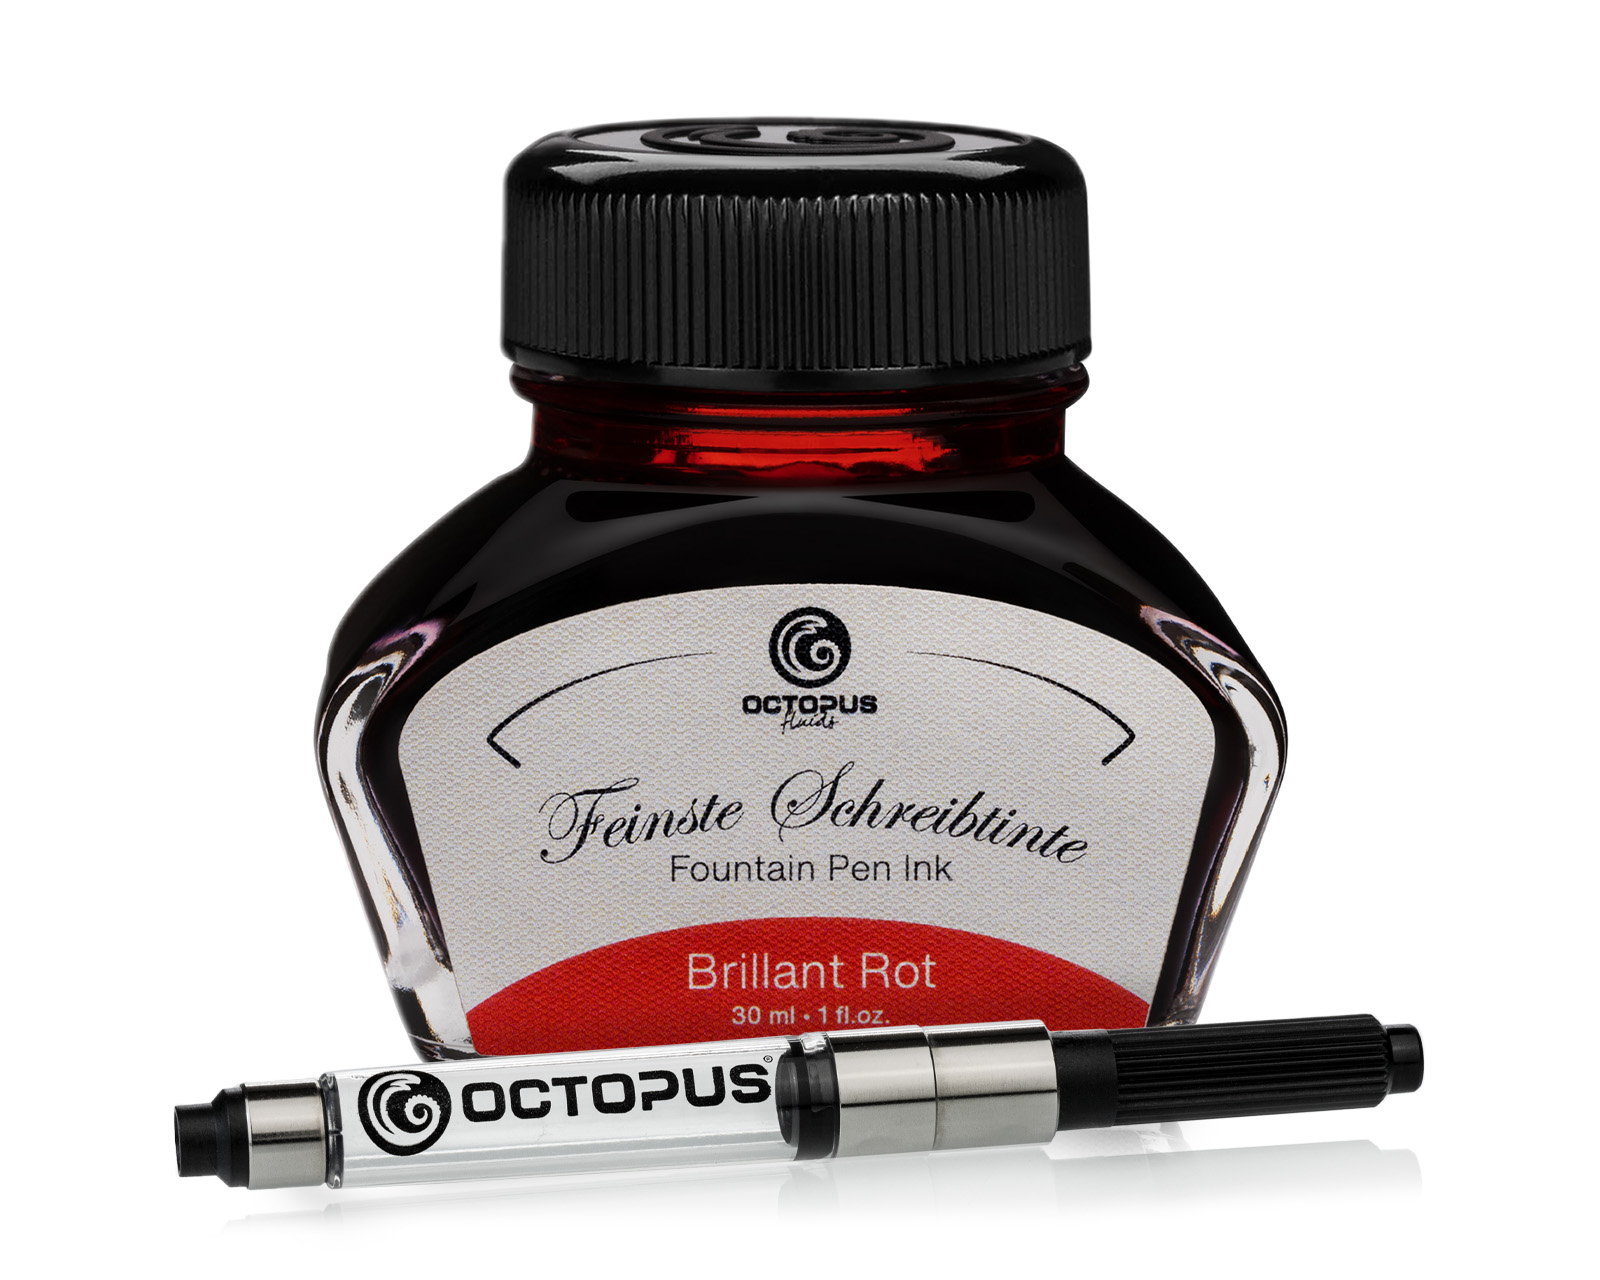 Fountain pen ink including converter, Writing ink for fountain pen, Brillant Rot 30ml in inkwell